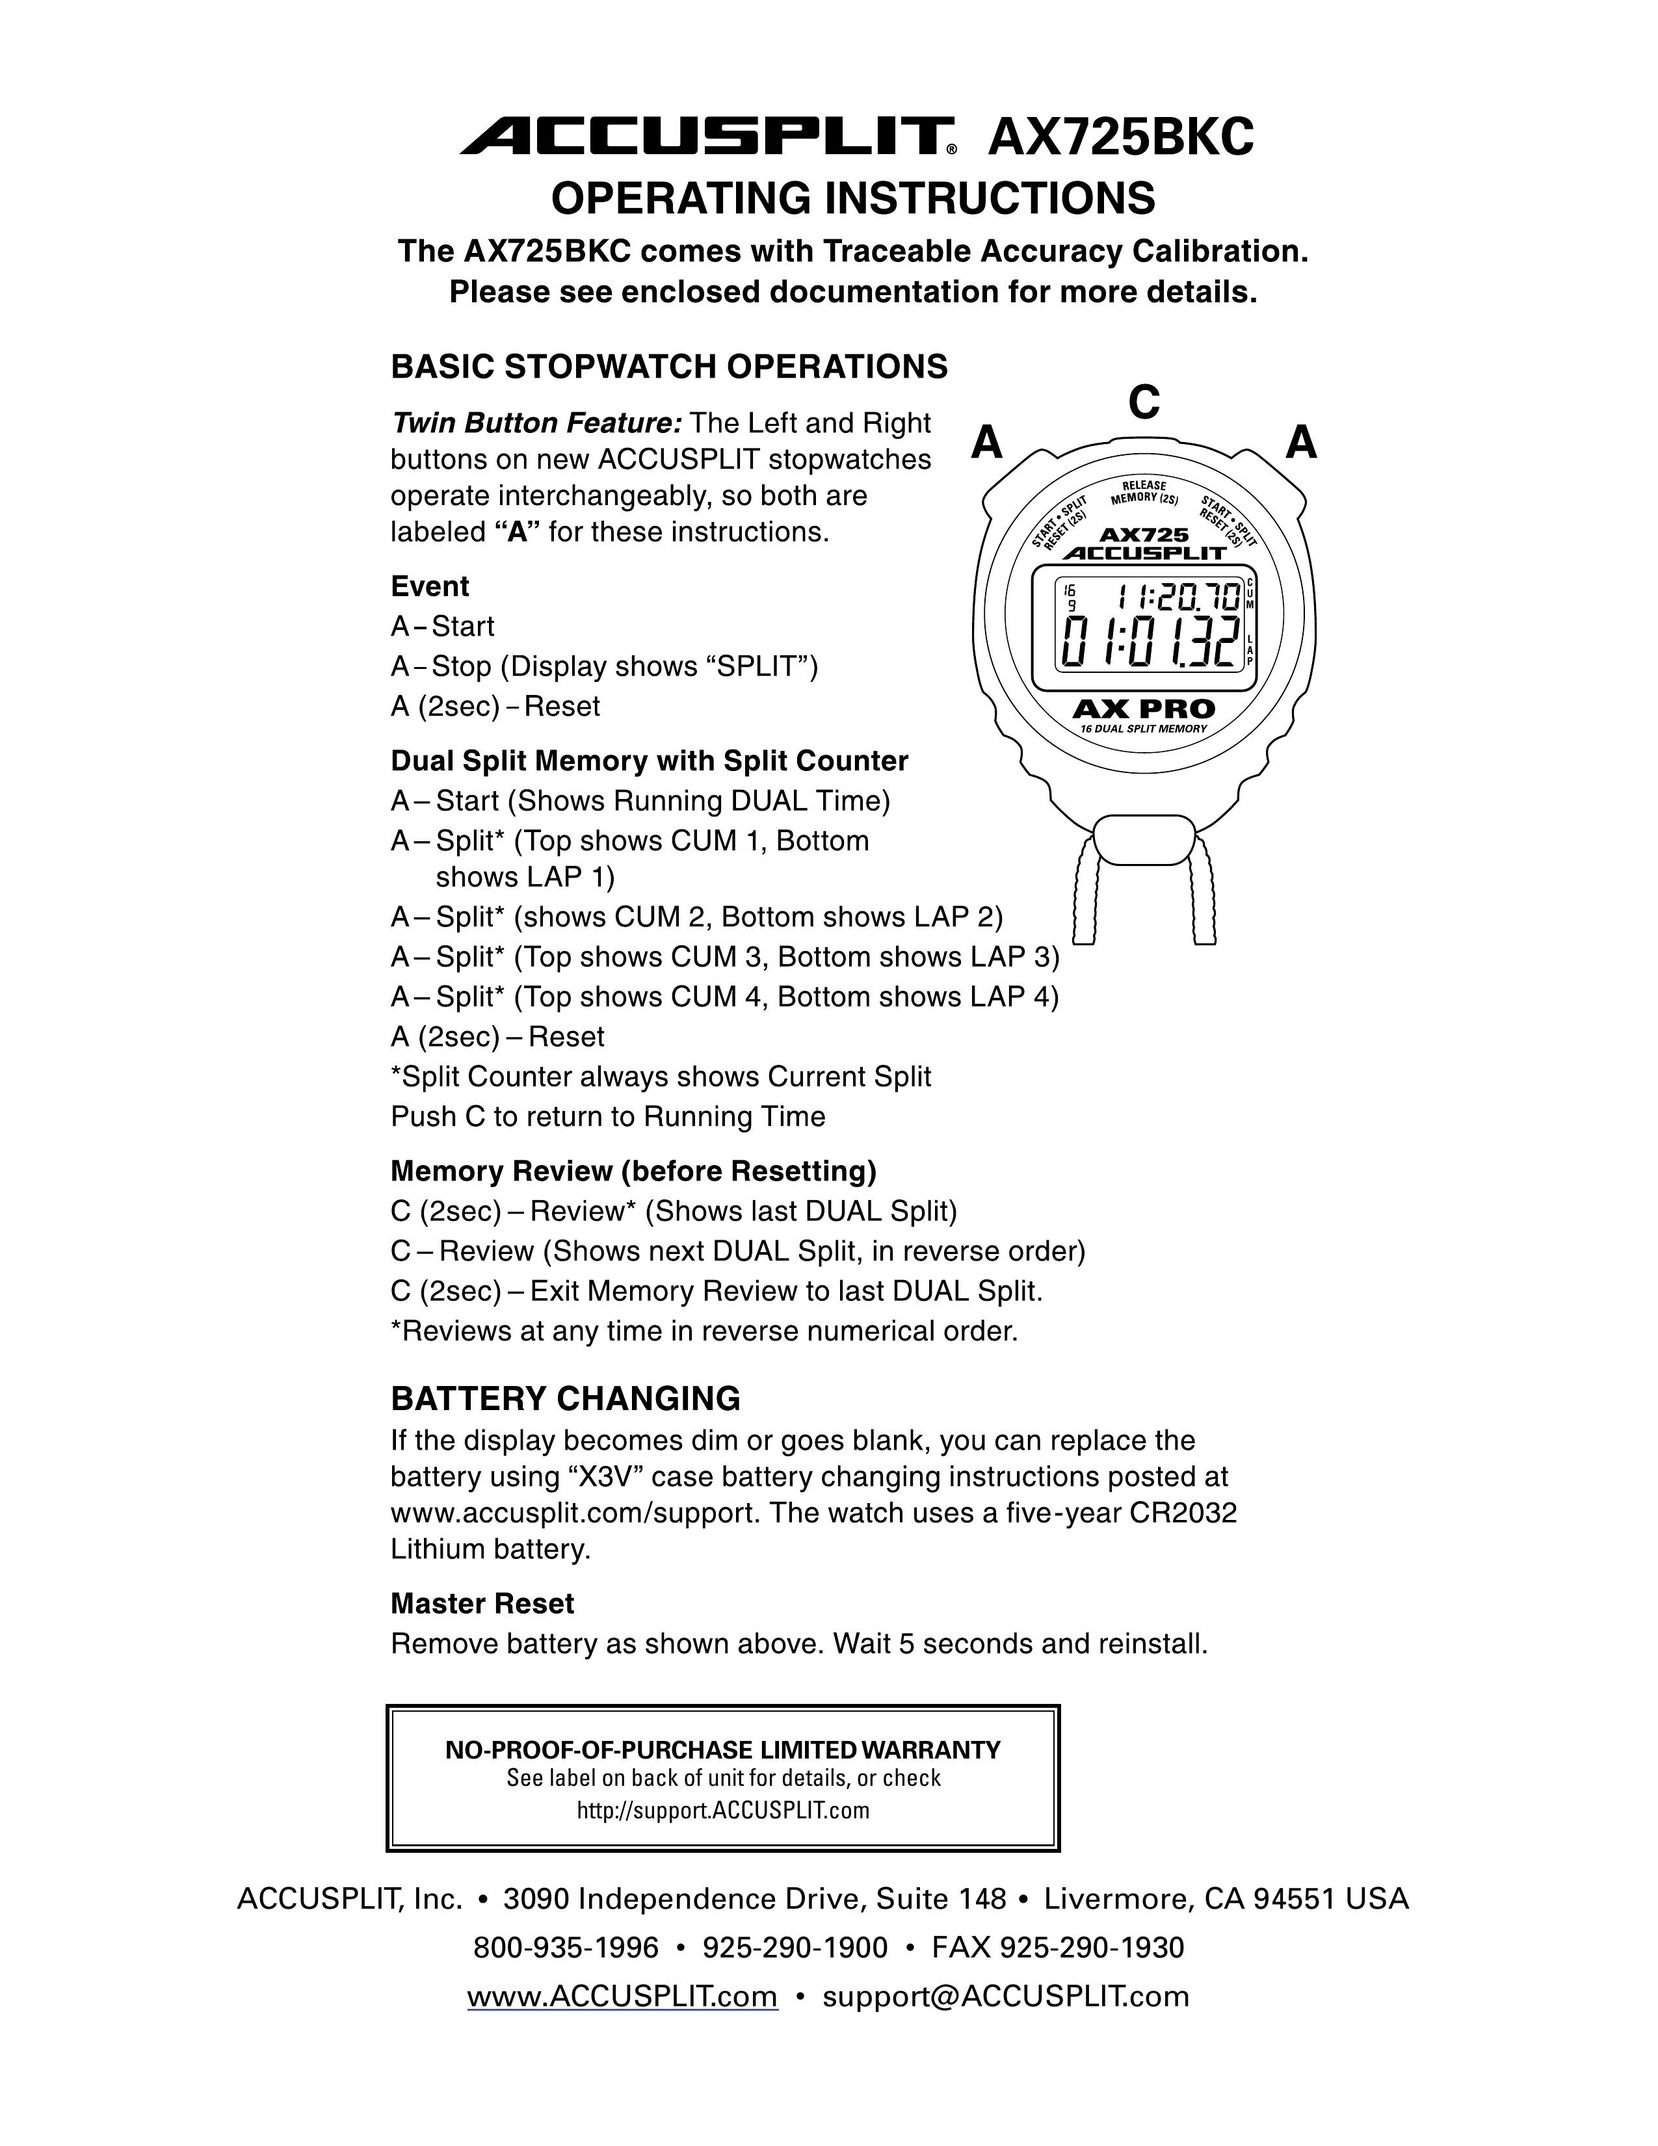 Accusplit AX725BKC Heart Rate Monitor User Manual